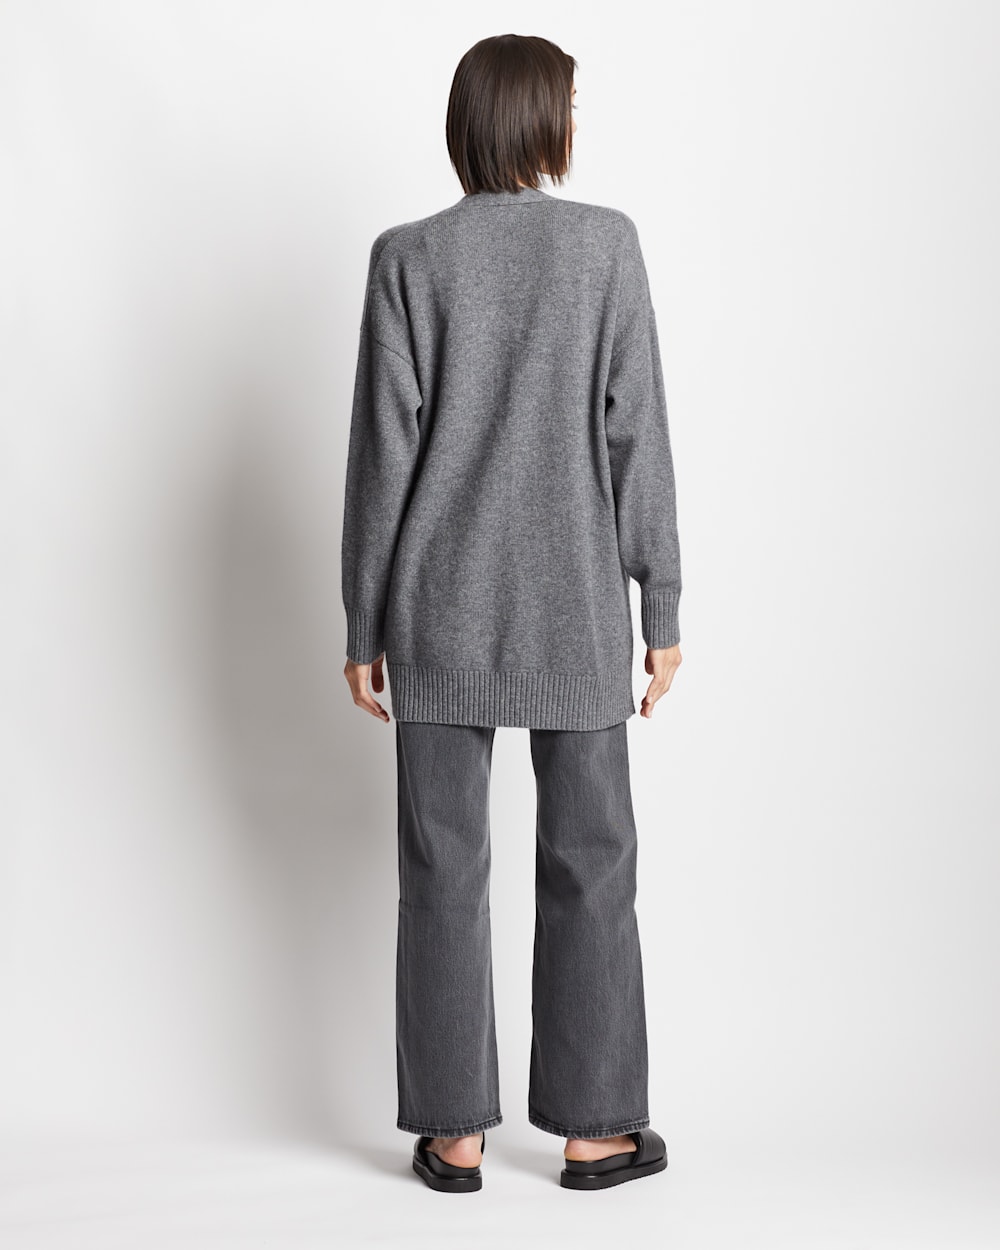 ALTERNATE VIEW OF WOMEN'S MERINO/CASHMERE COCOON CARDIGAN IN CHARCOAL HEATHER image number 4